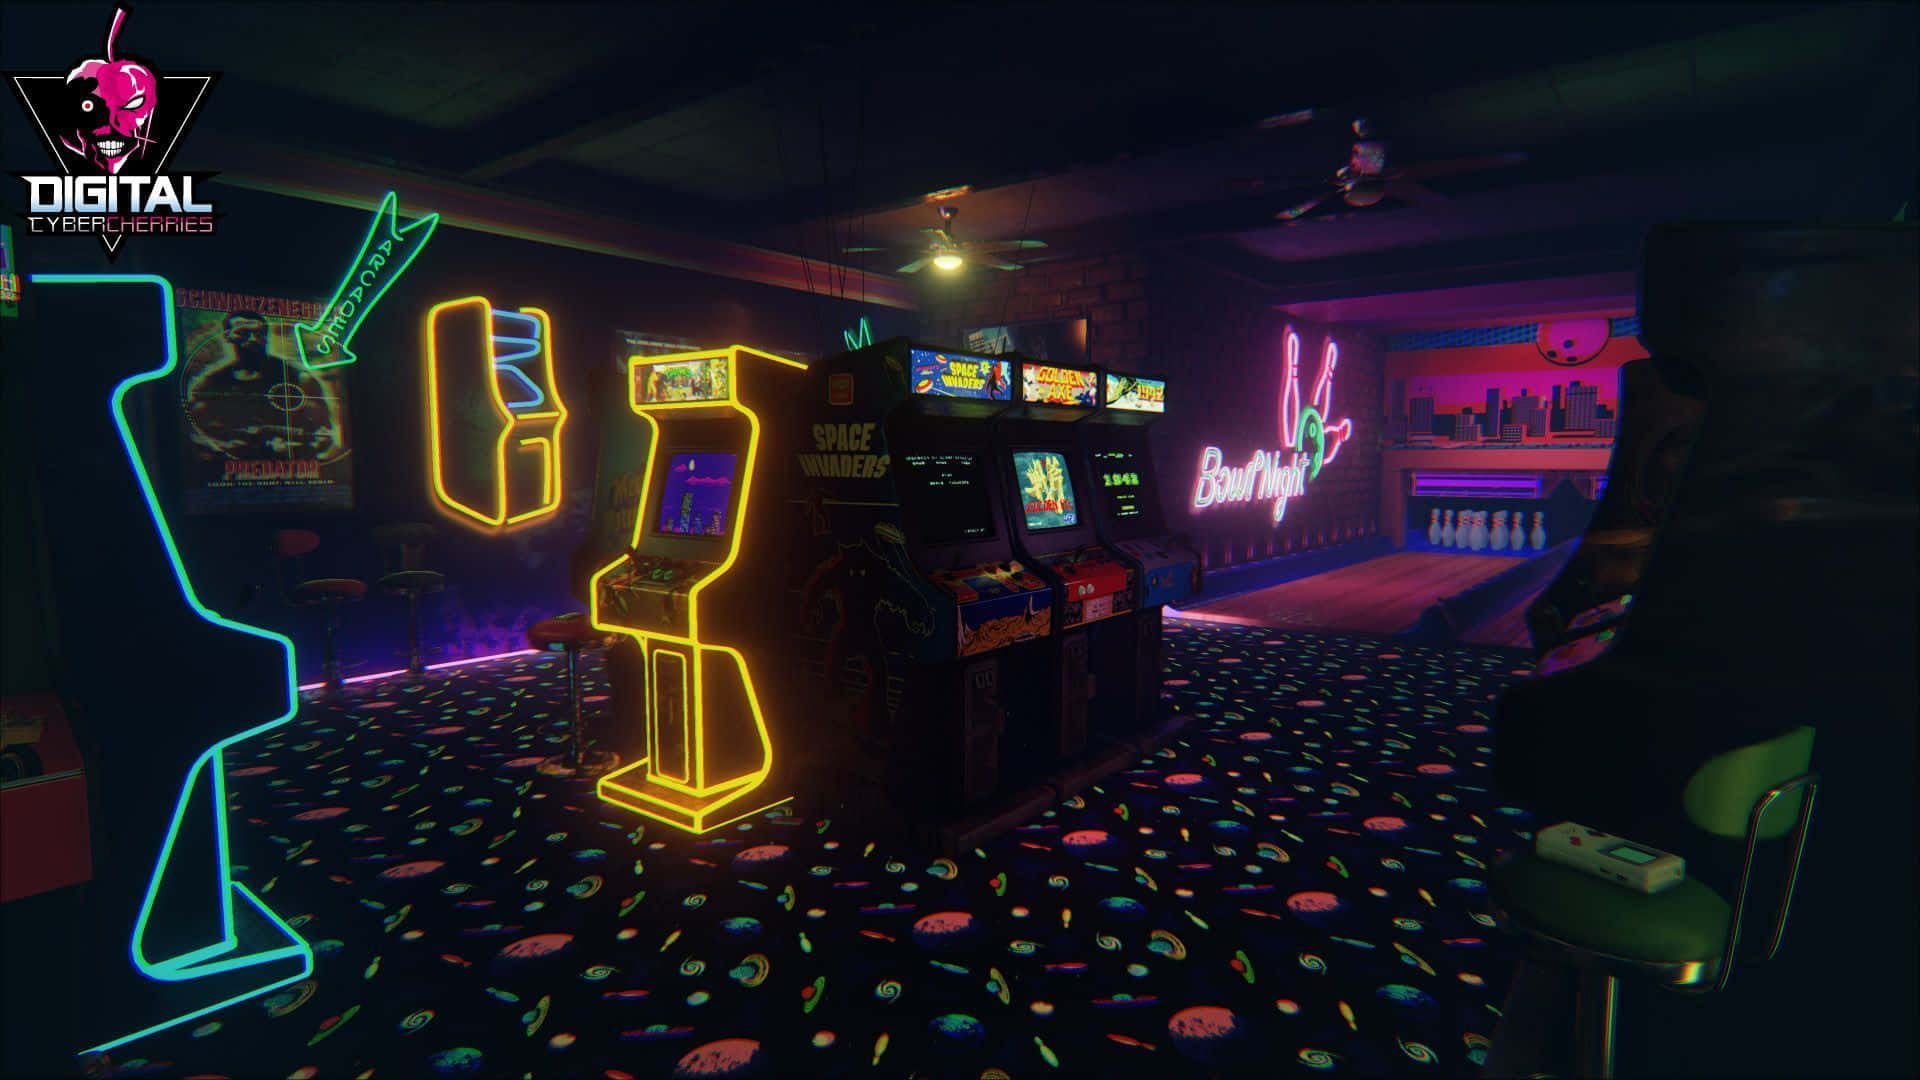 Relive the good days of the 80s at the Arcade Wallpaper